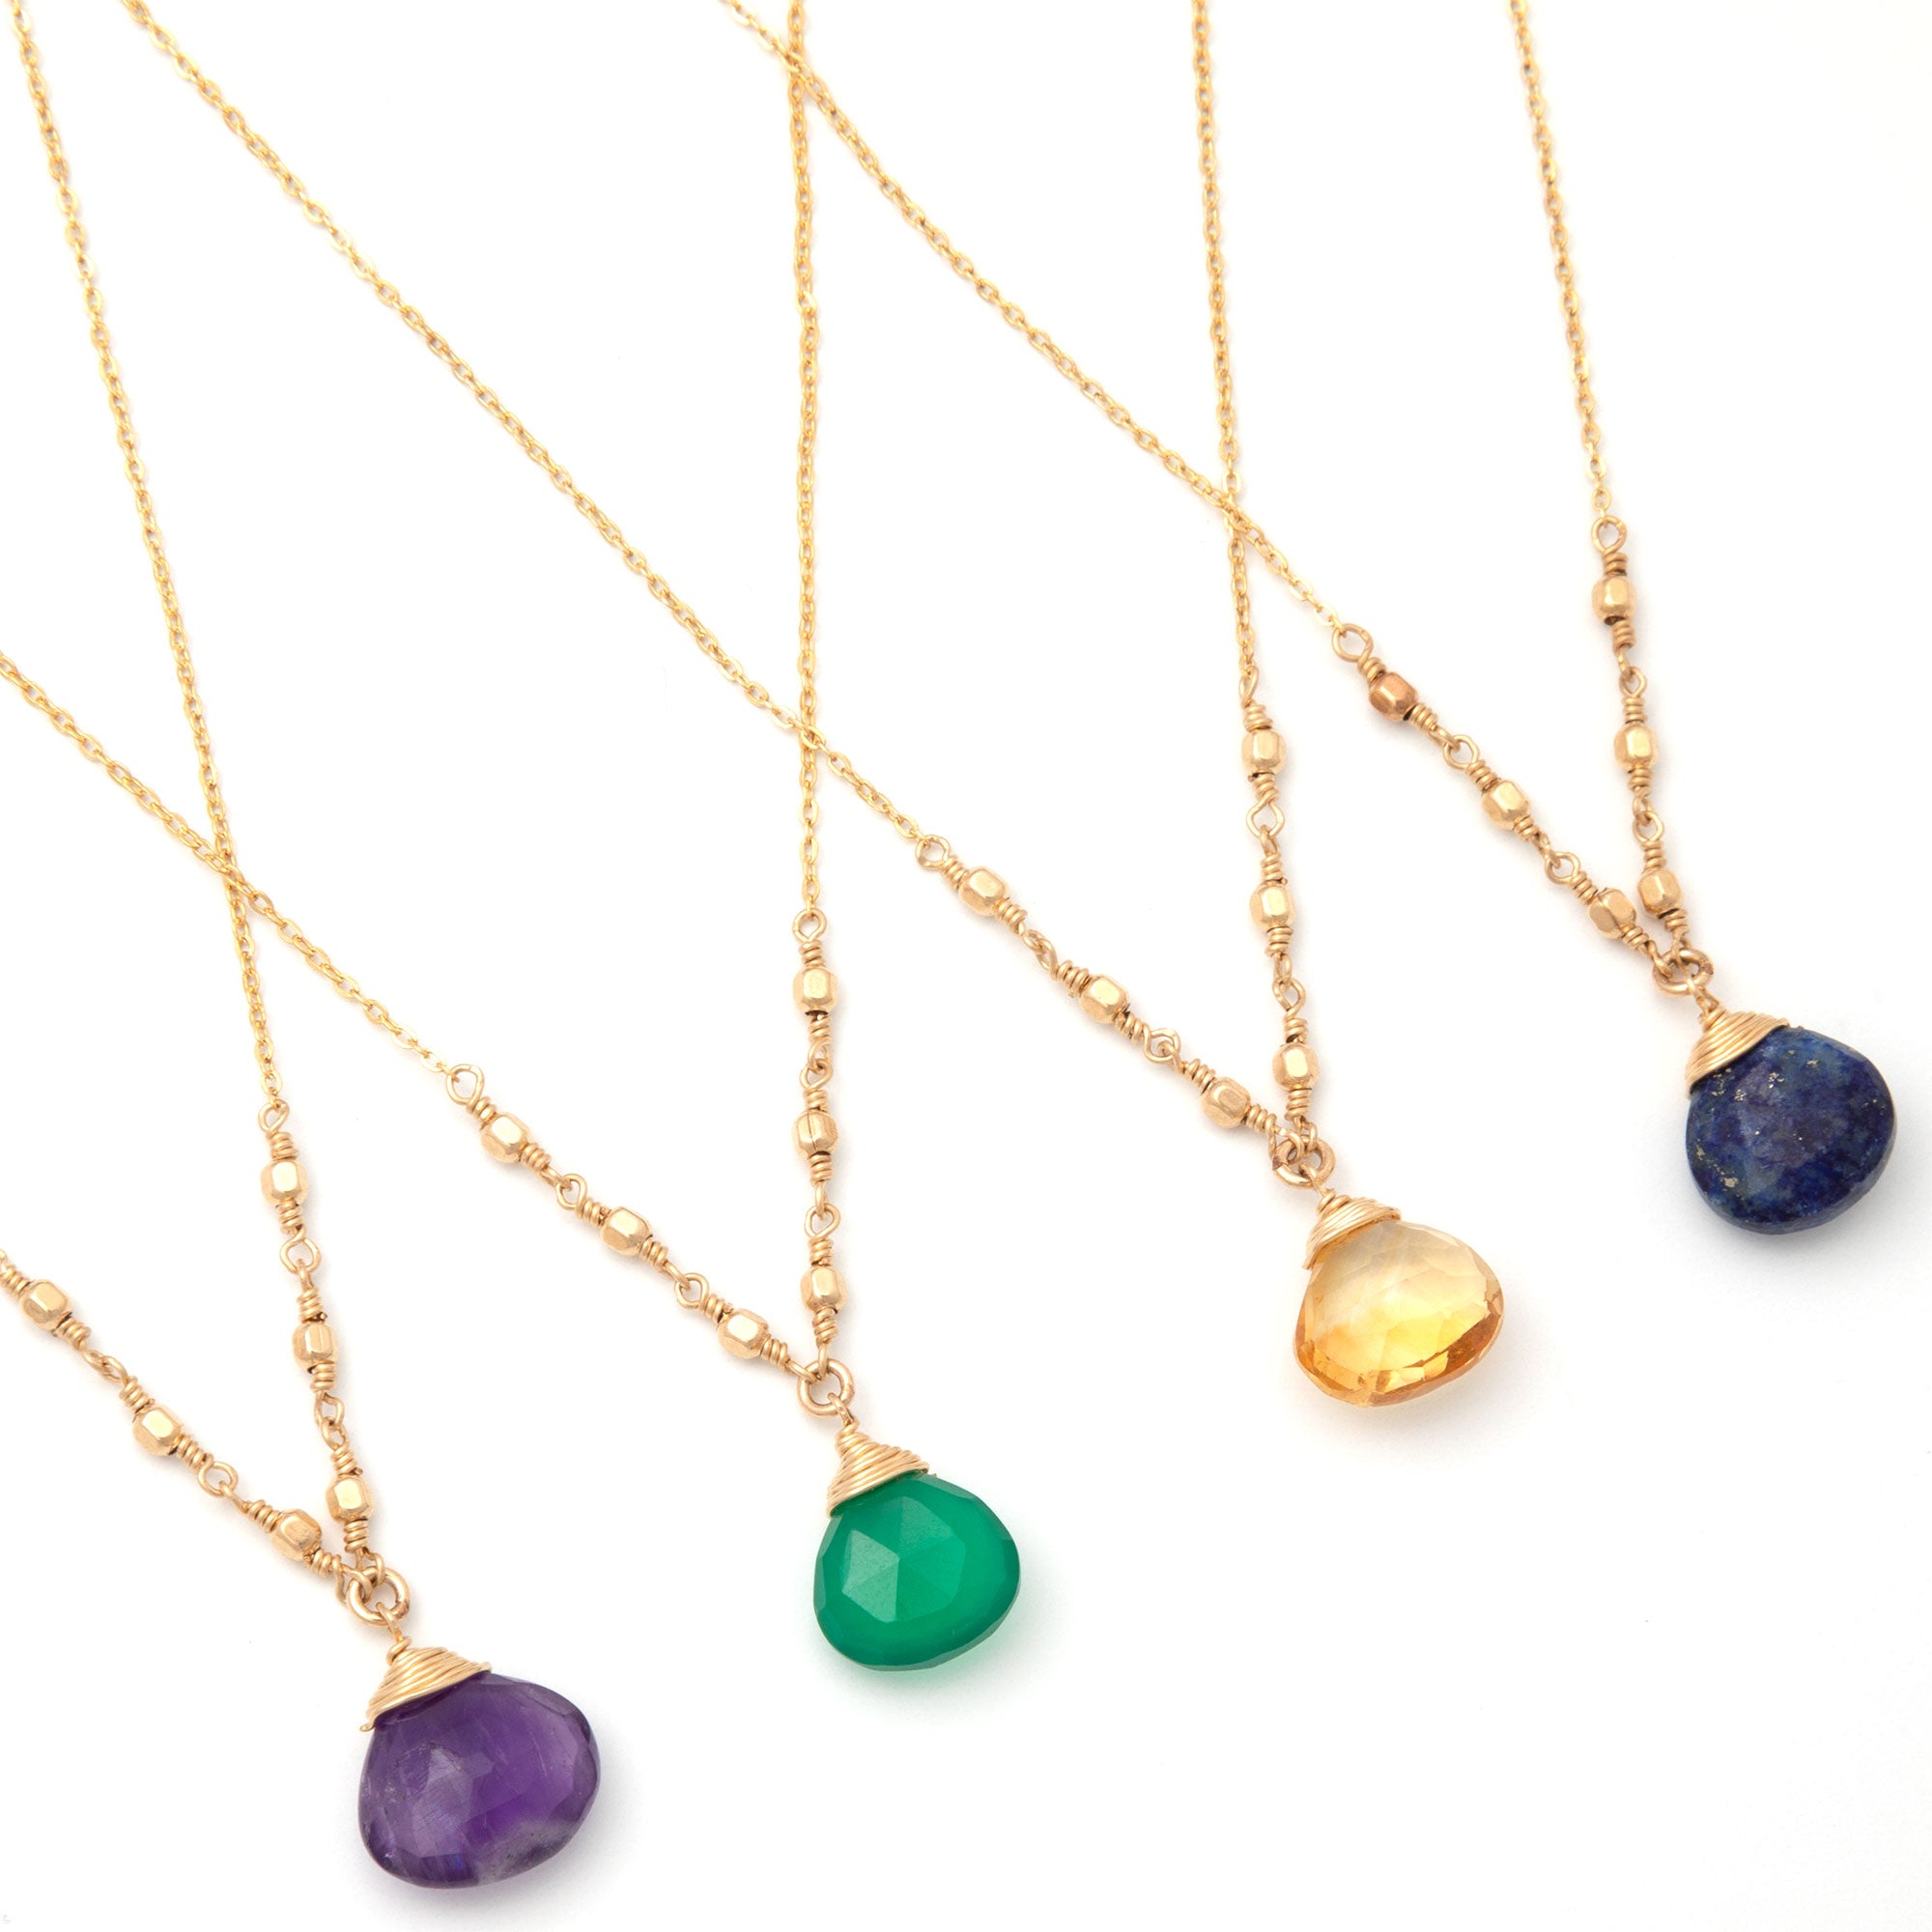 Gold Filled Necklace With Gemstone - Amethyst